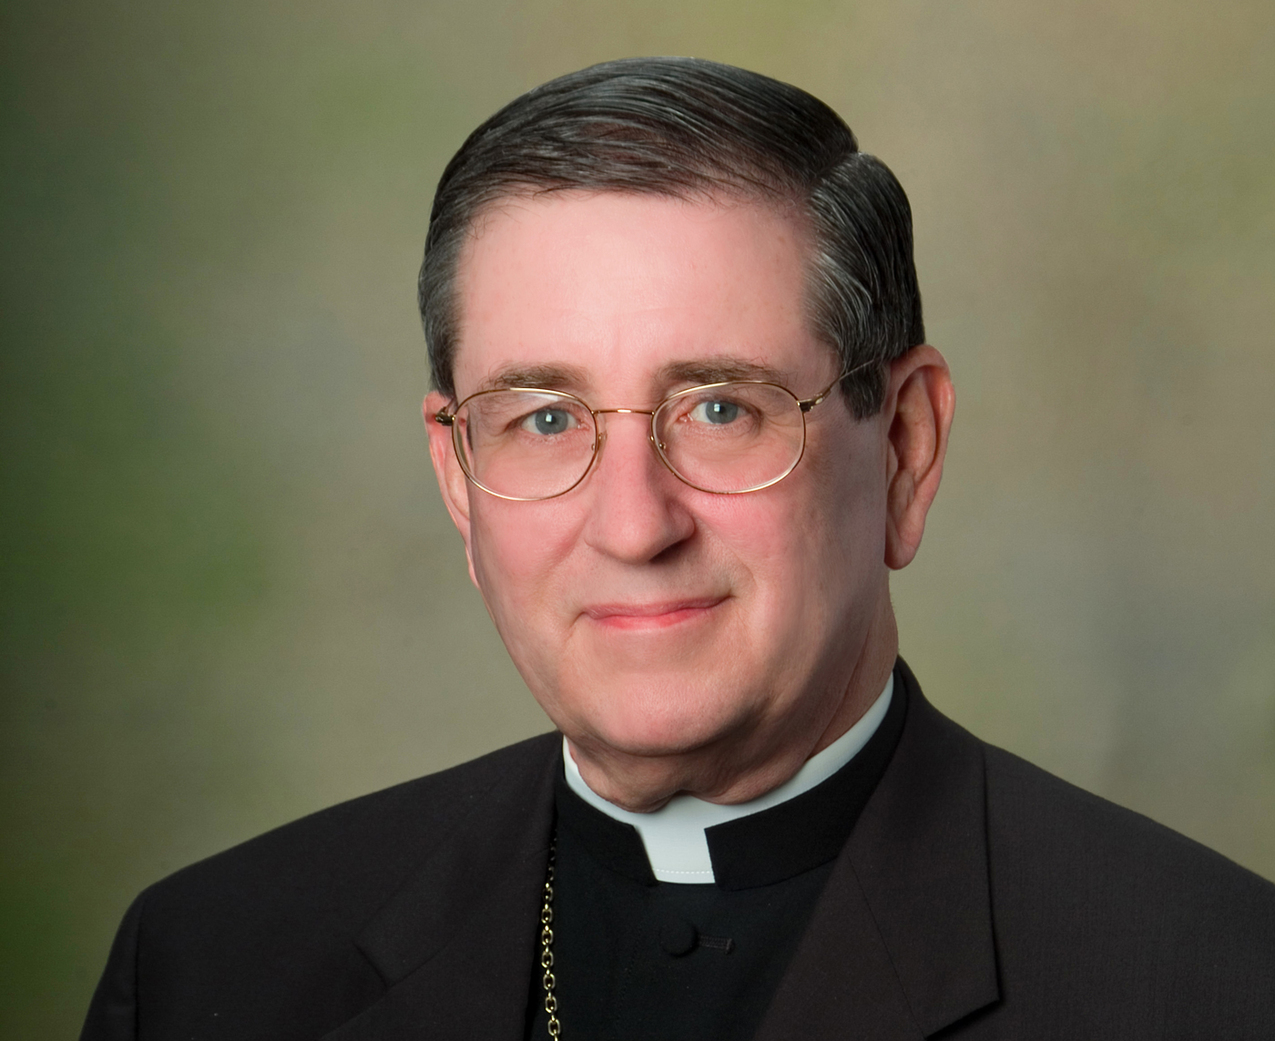 Bishop Richard Lennon dies; served as the 10th Bishop of the Catholic Diocese of Cleveland